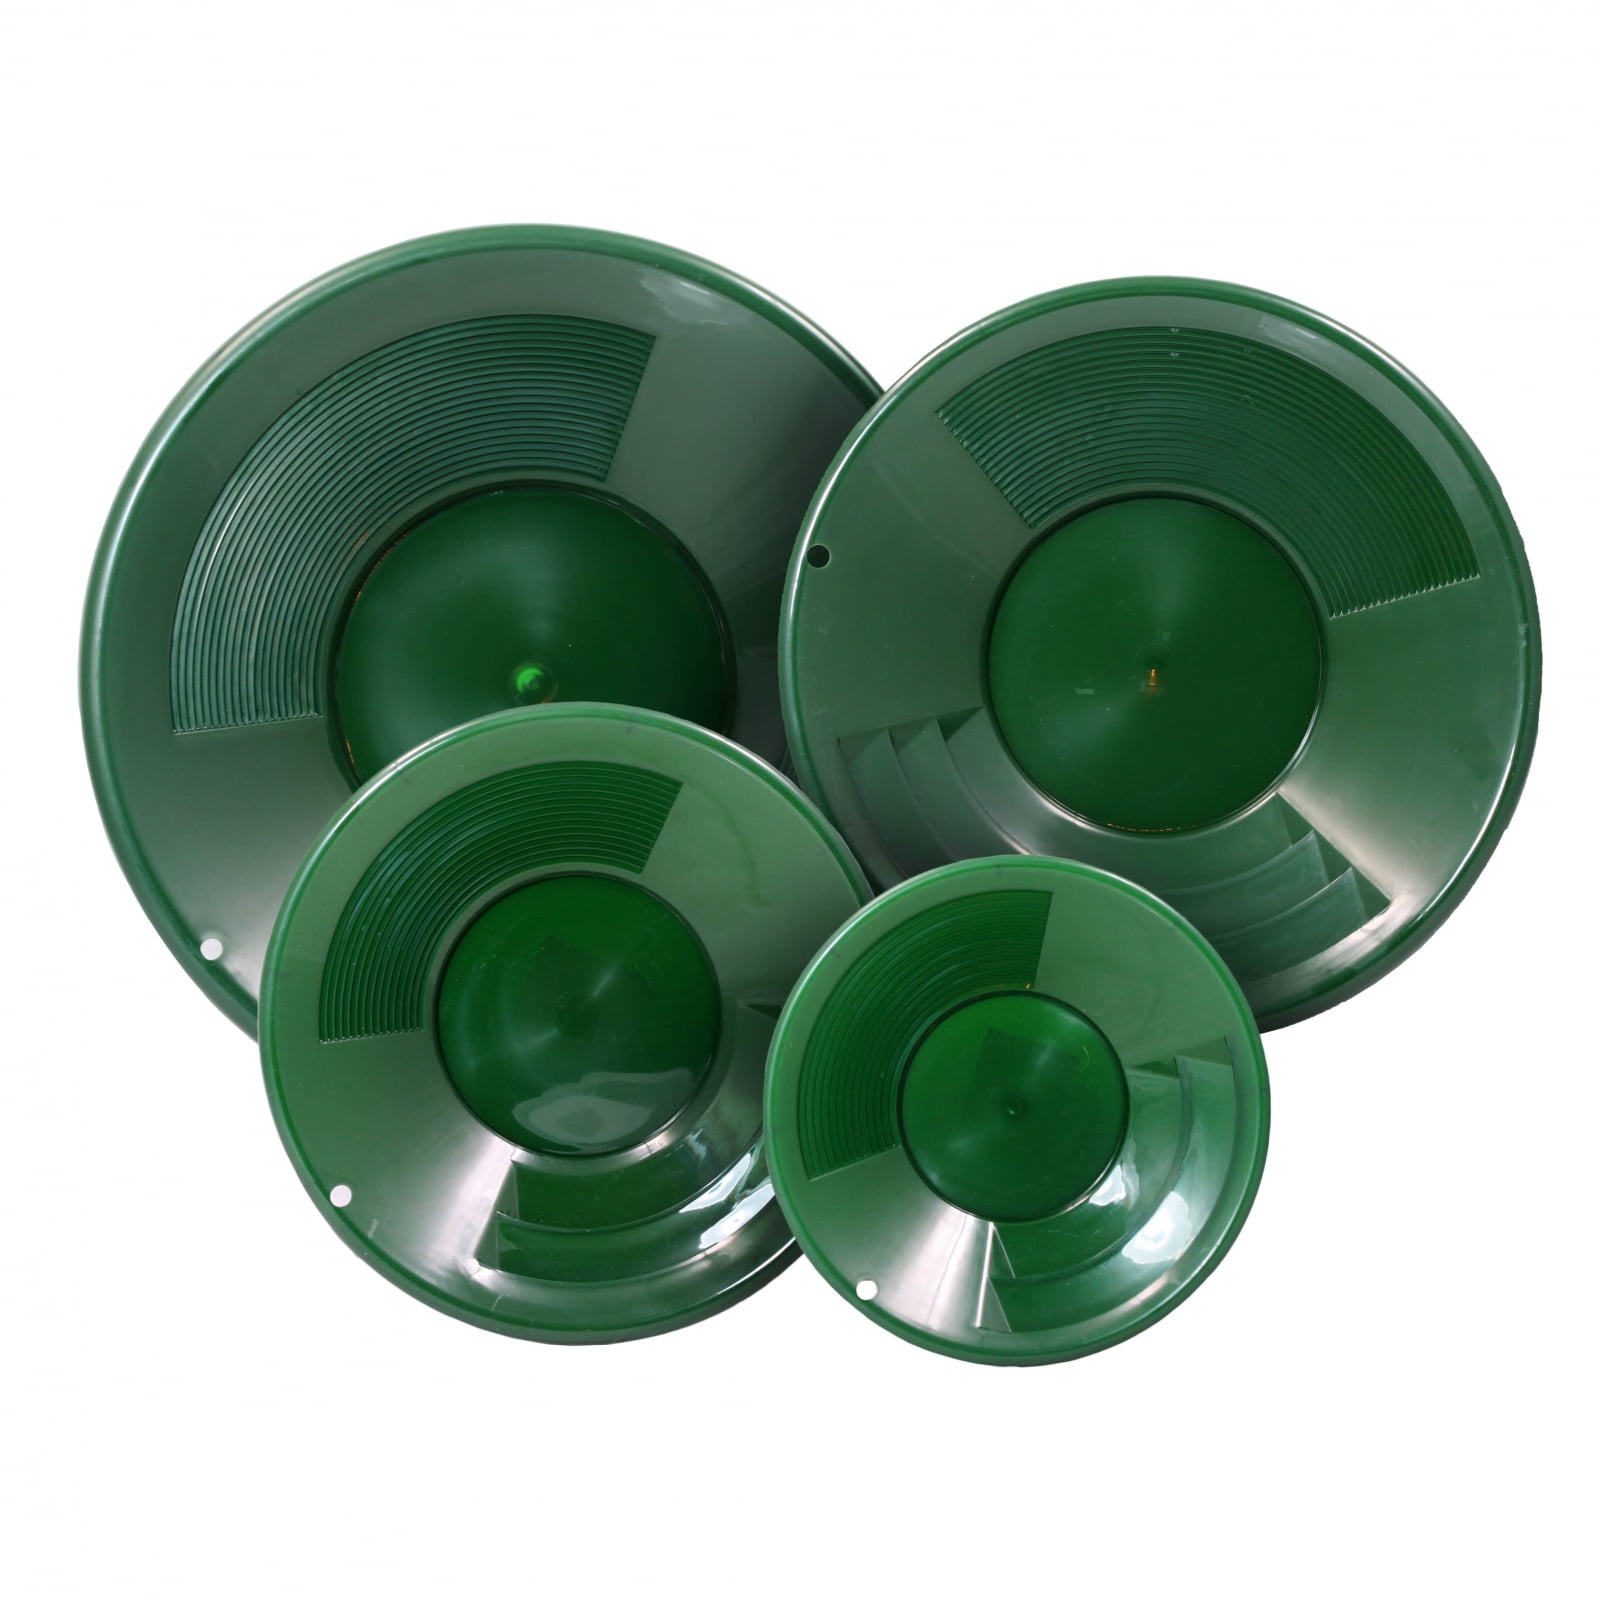 12" GREEN Plastic Gold Pan w/ Shallow & Deep Riffles for Gold Prospecting 